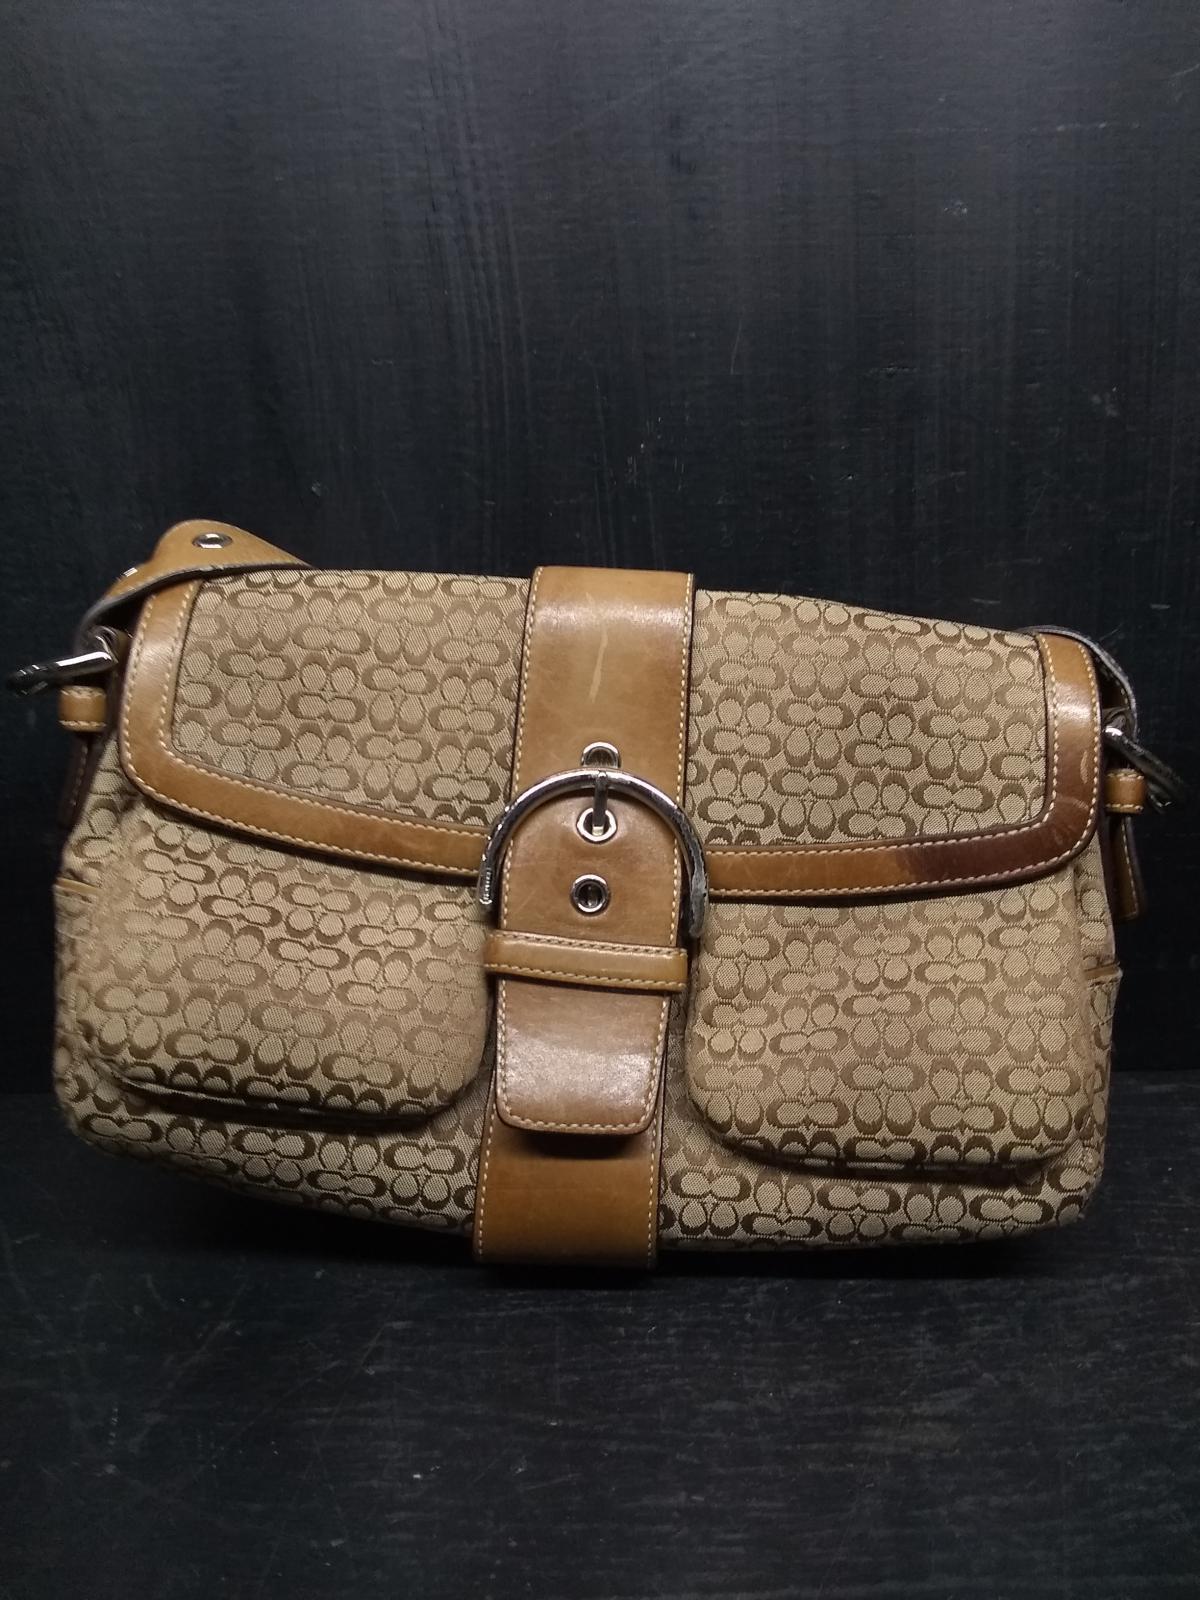 Unauthenticated Fabric Coach Purse with Buckle